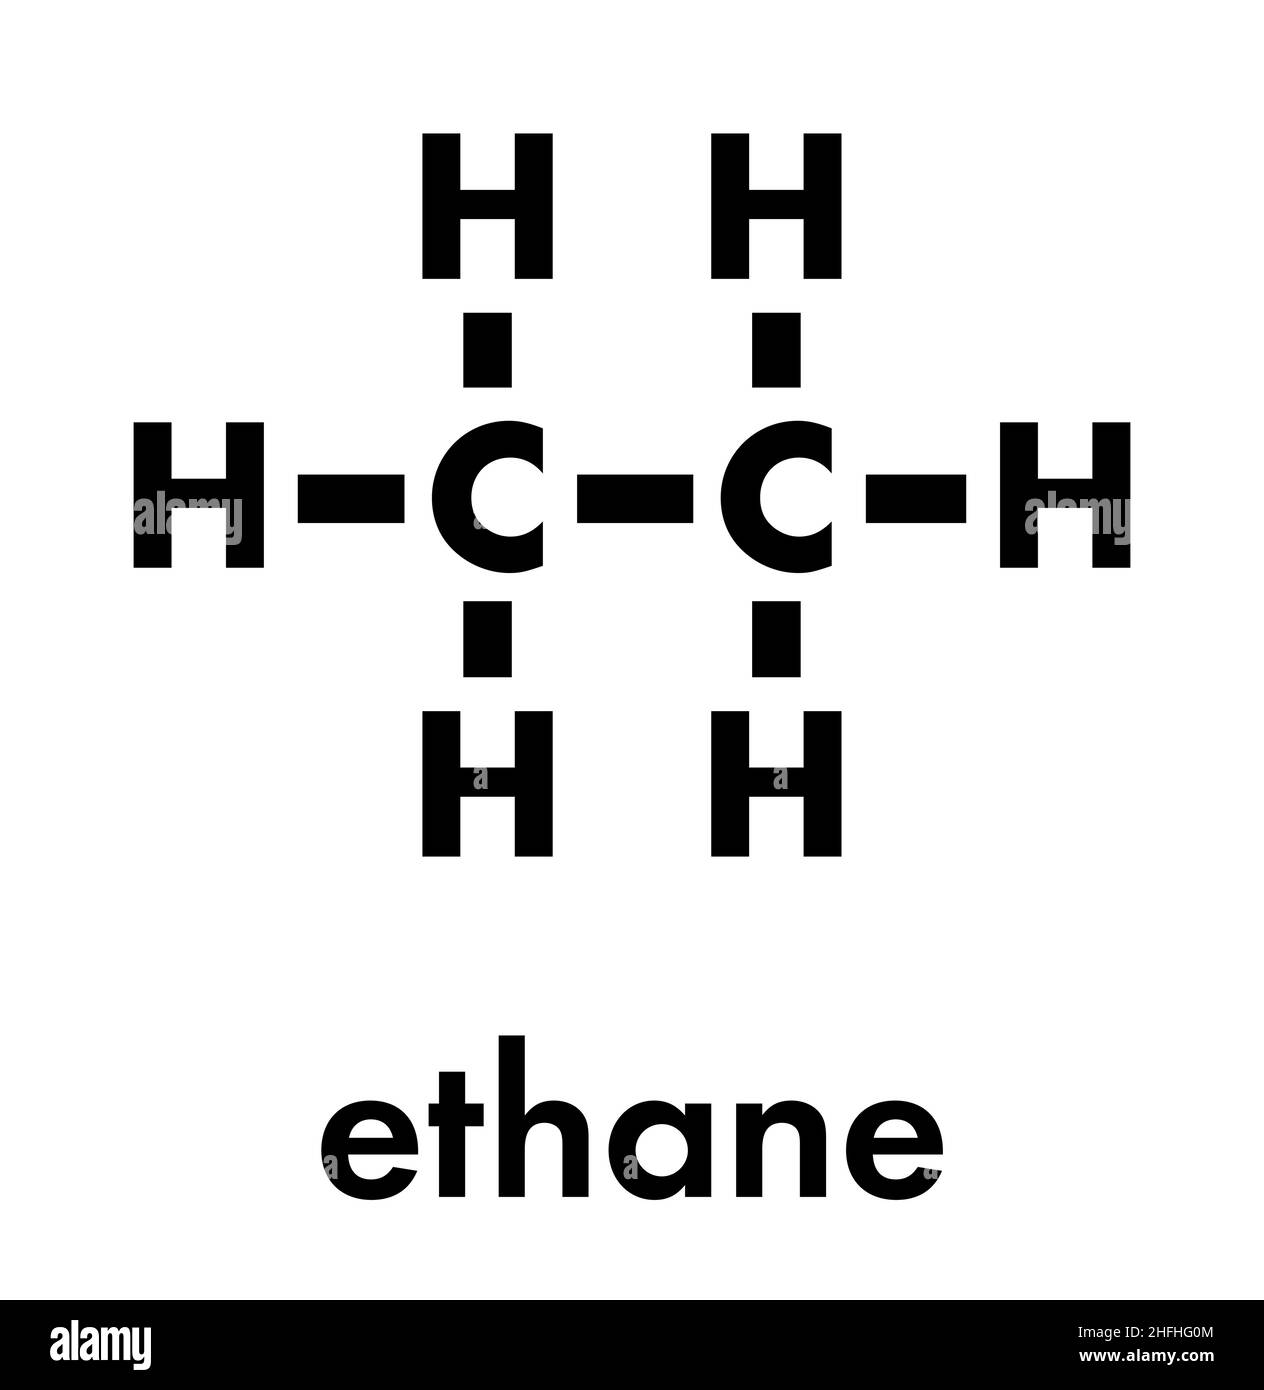 Ethane natural gas component molecule Black and White Stock Photos ...